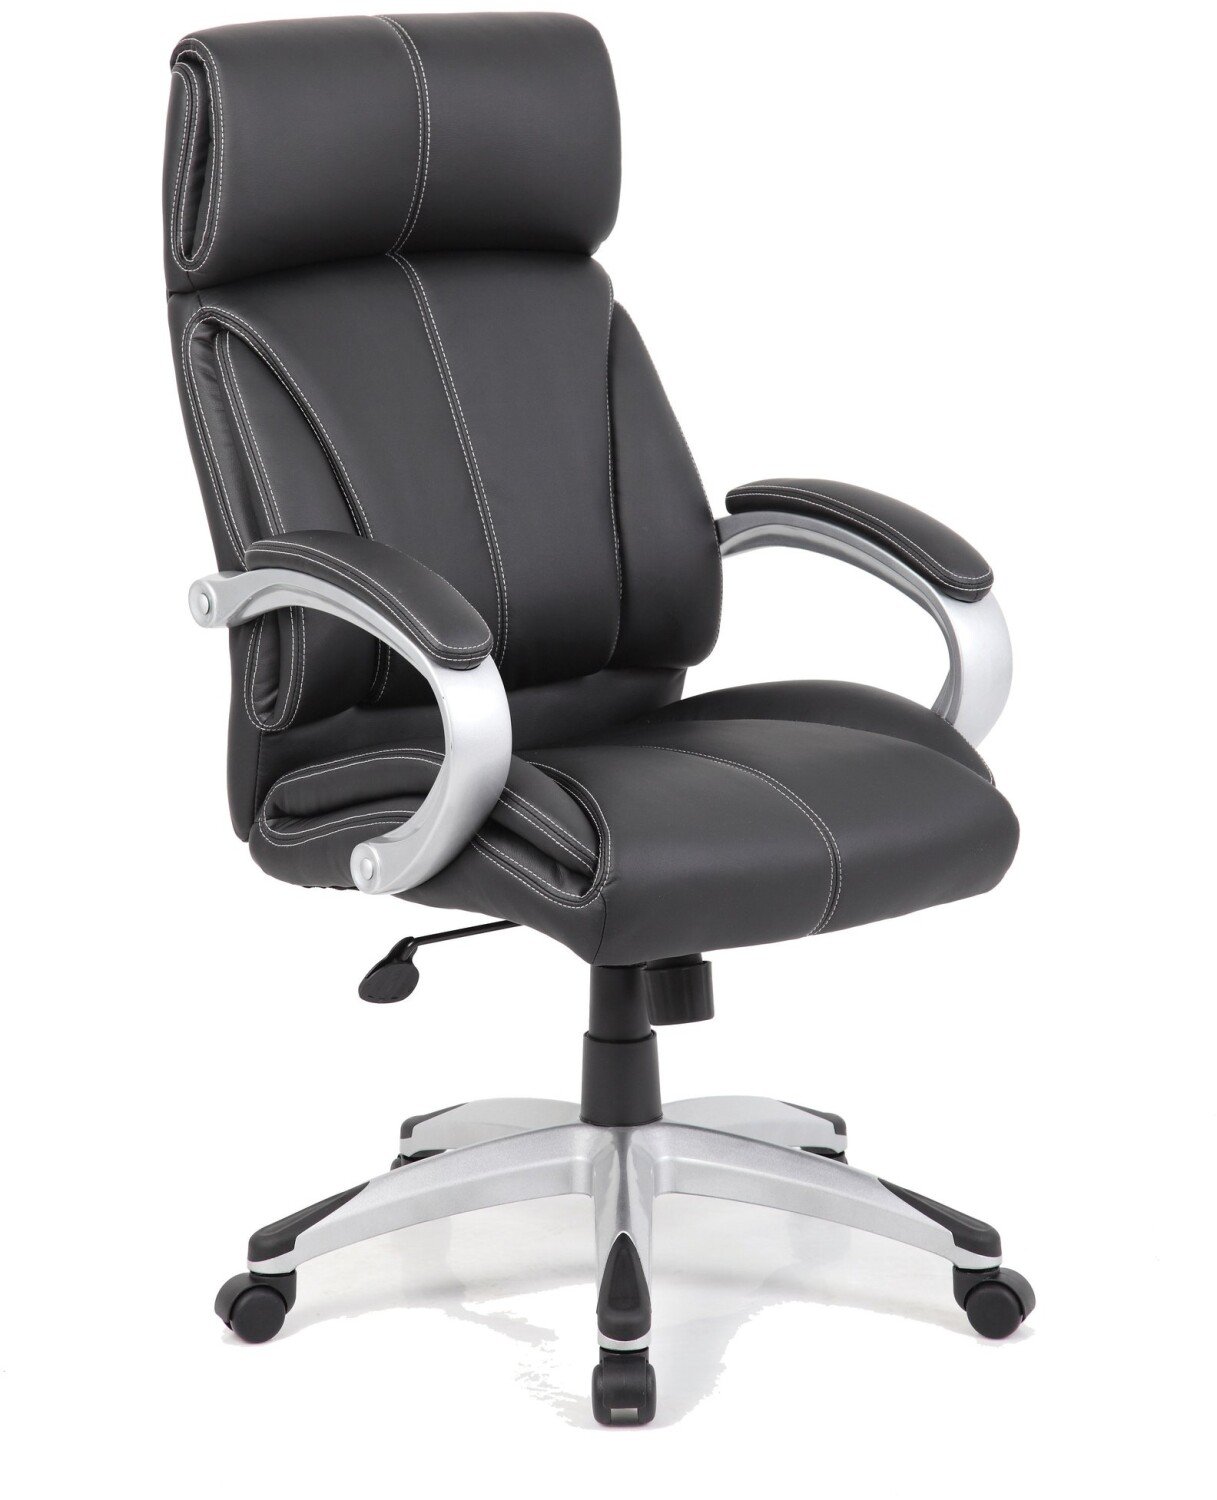 Nautilus Cloud High Back Bonded Leather Manager Chair with Satin Silver ...